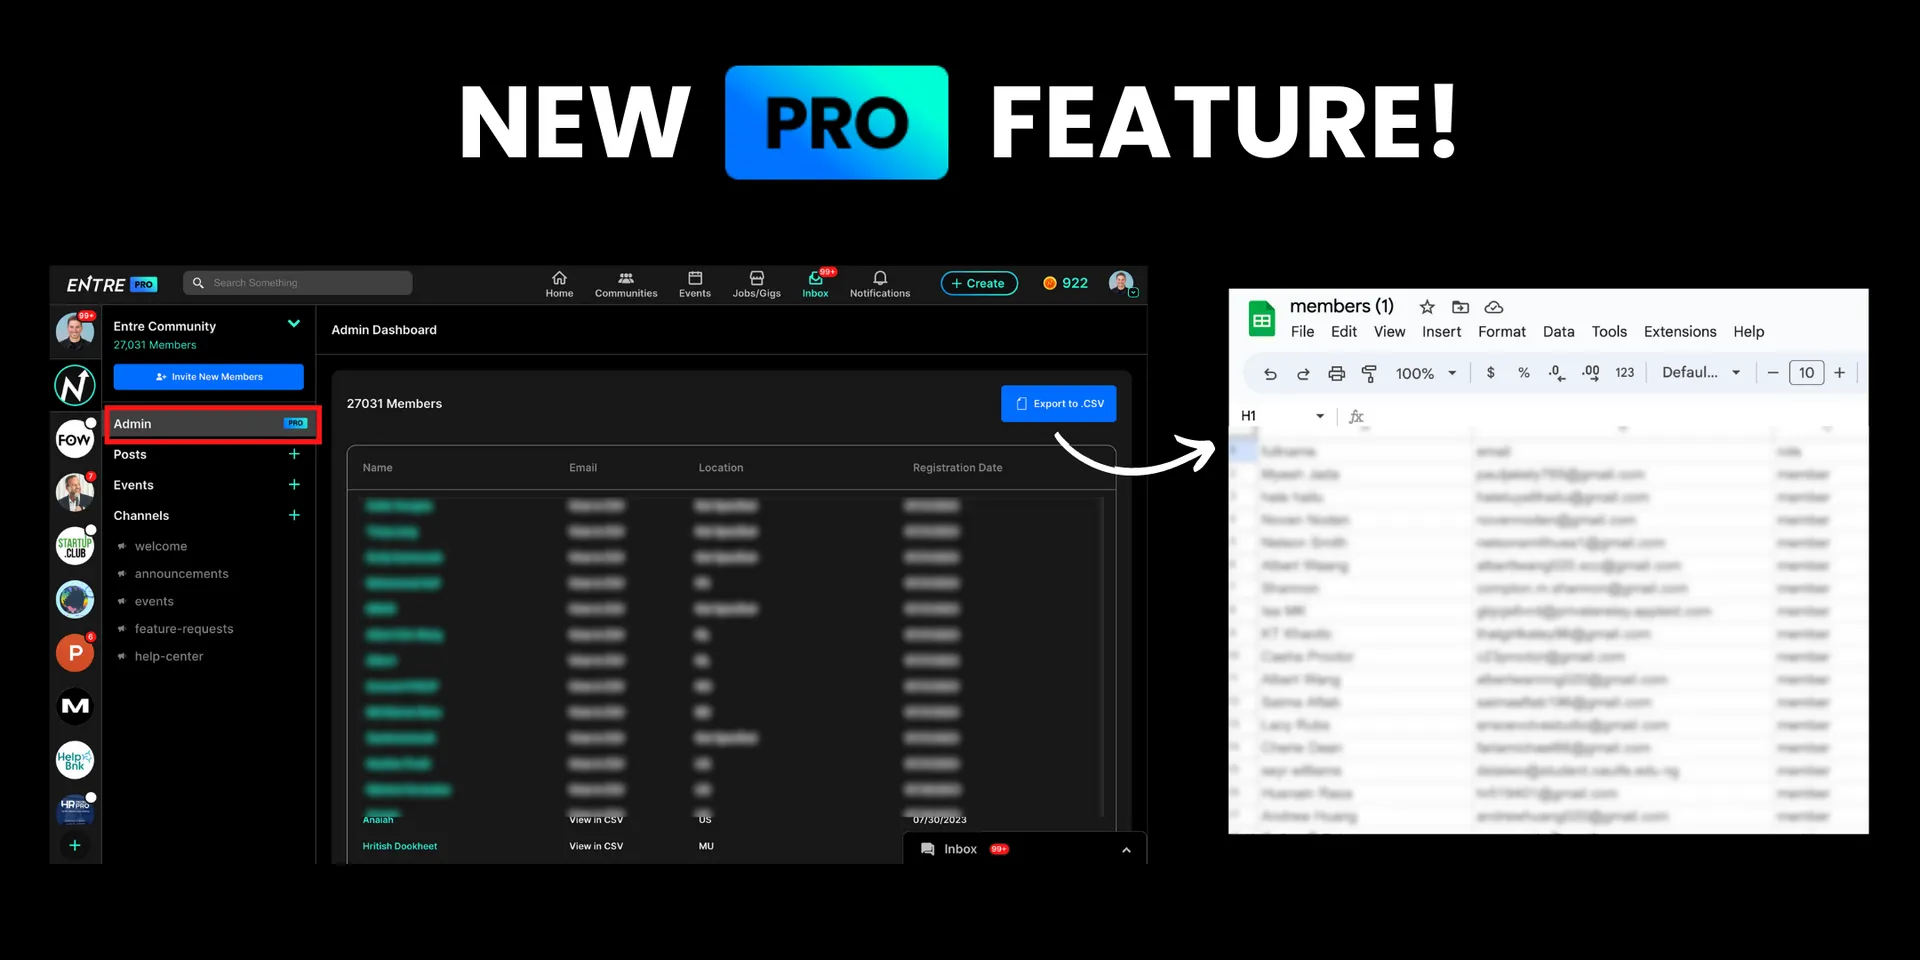 New Feature Alert 🚨

PRO Members now have access to an Admin Dashboard in their Communities 🚀

You'll now get access to:

Export members list with emails, location, etc.
Paid Events
Analytics (coming soon)
Demographics (coming soon)
Paid Community (coming soon)